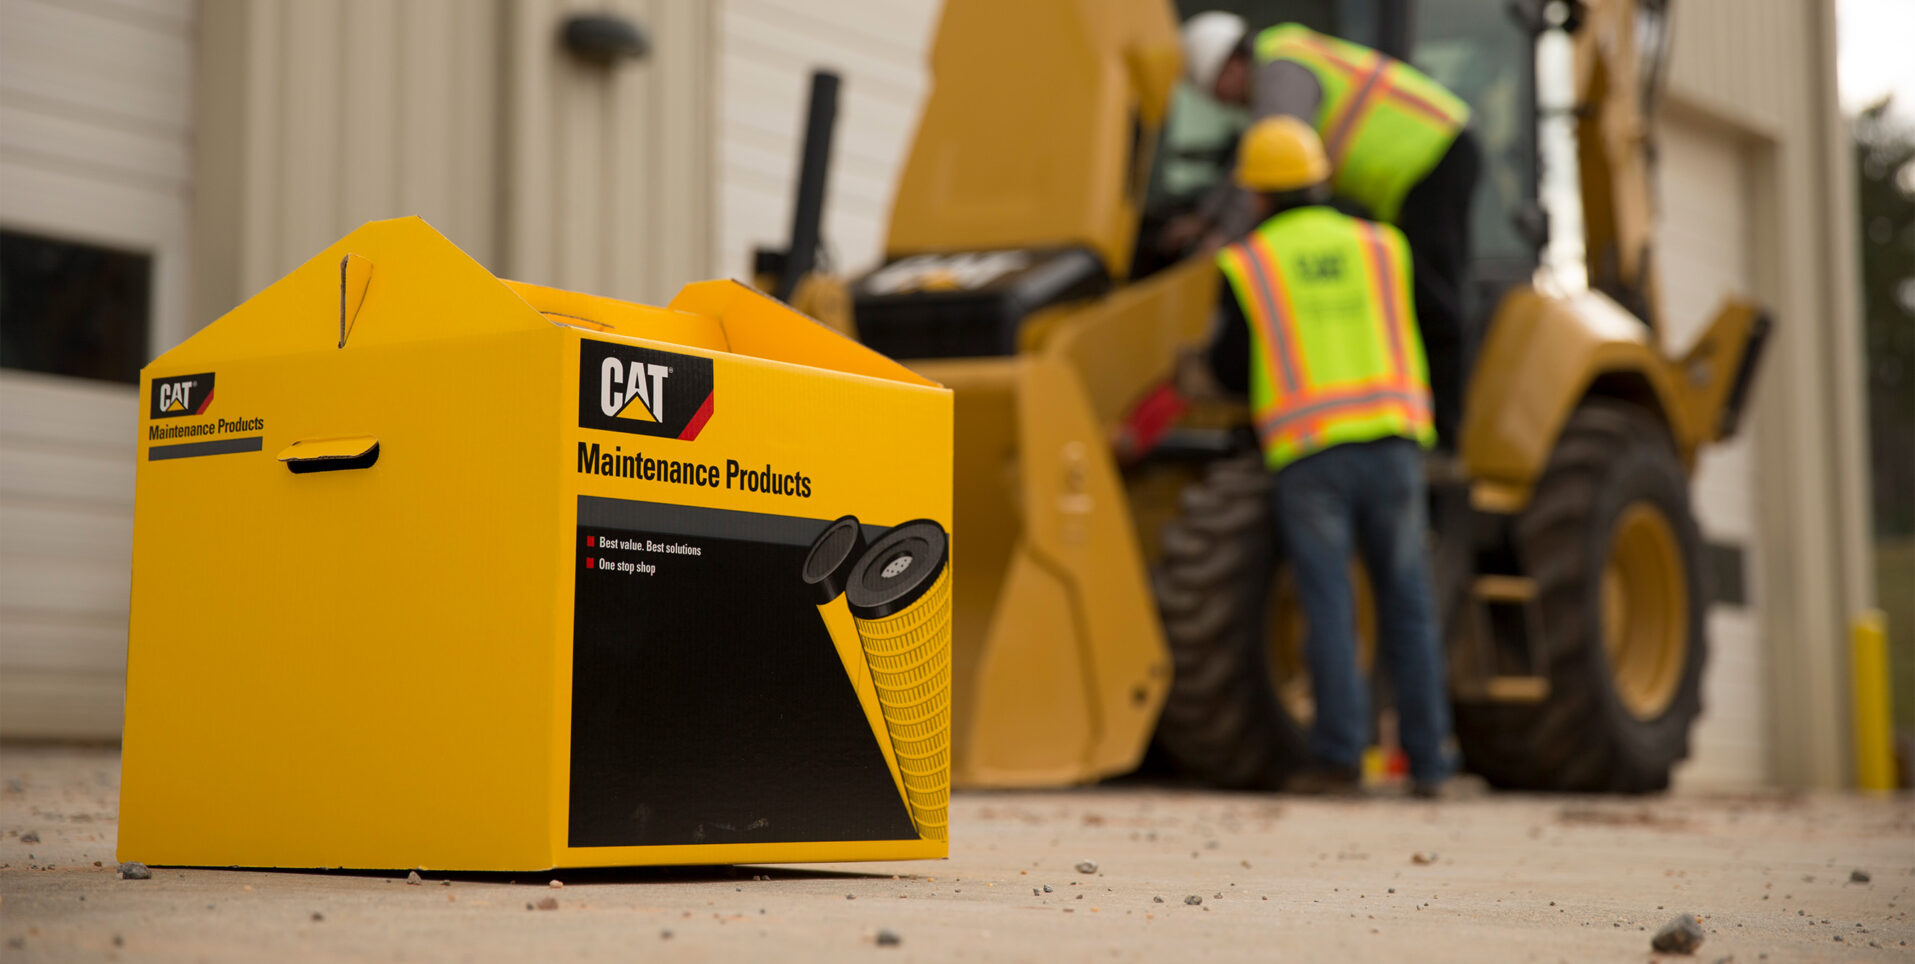 Cat maintenance kit in the foreground with two men working on a Cat machine in the background